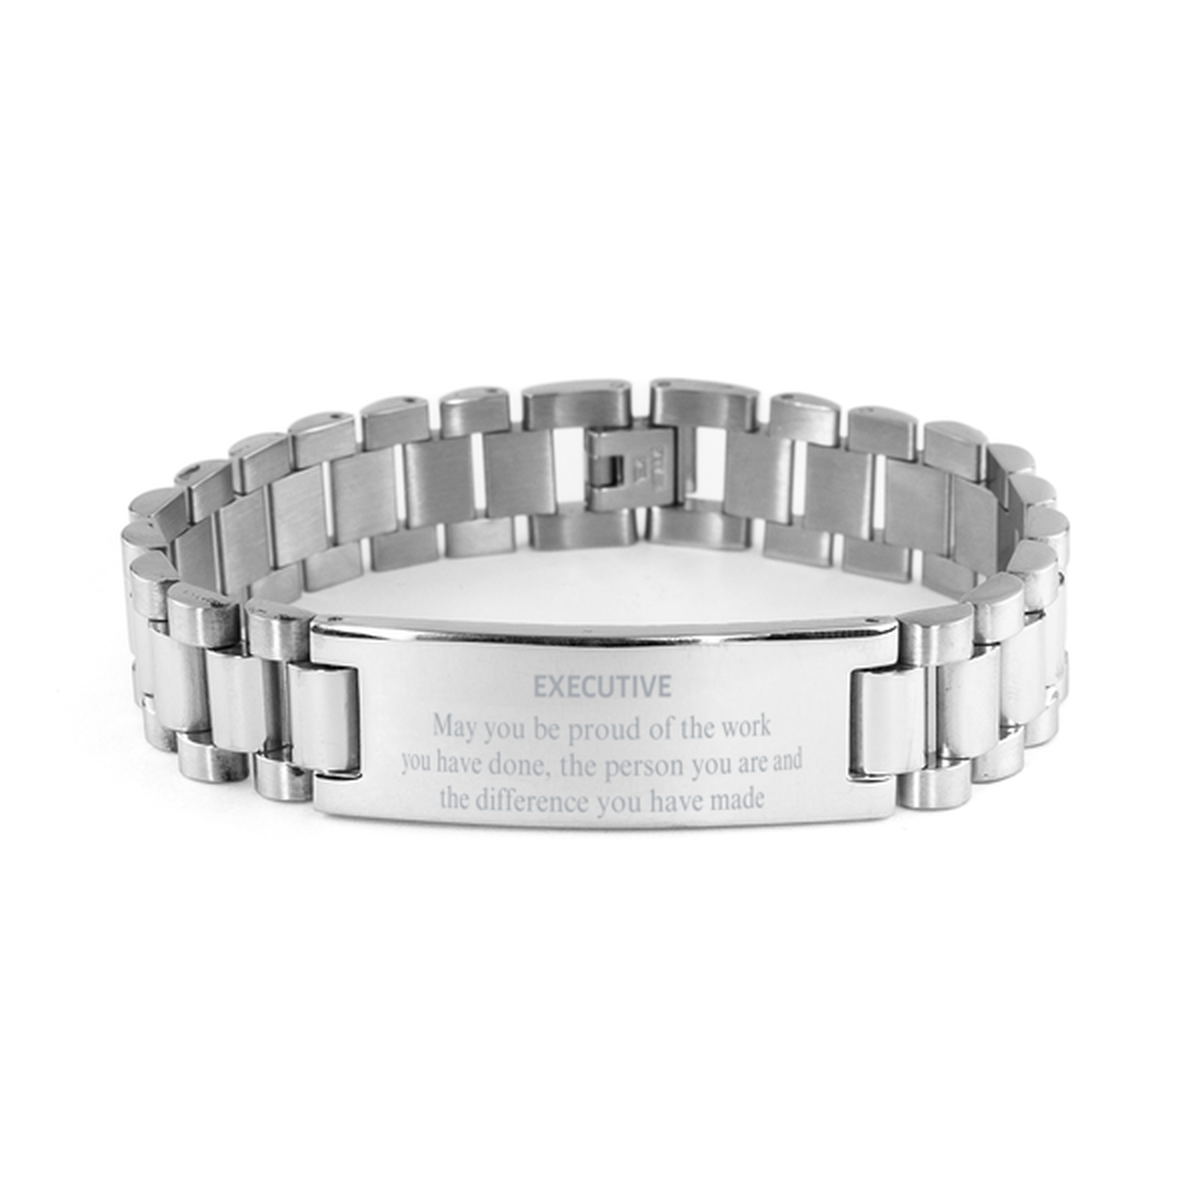 Executive May you be proud of the work you have done, Retirement Executive Ladder Stainless Steel Bracelet for Colleague Appreciation Gifts Amazing for Executive